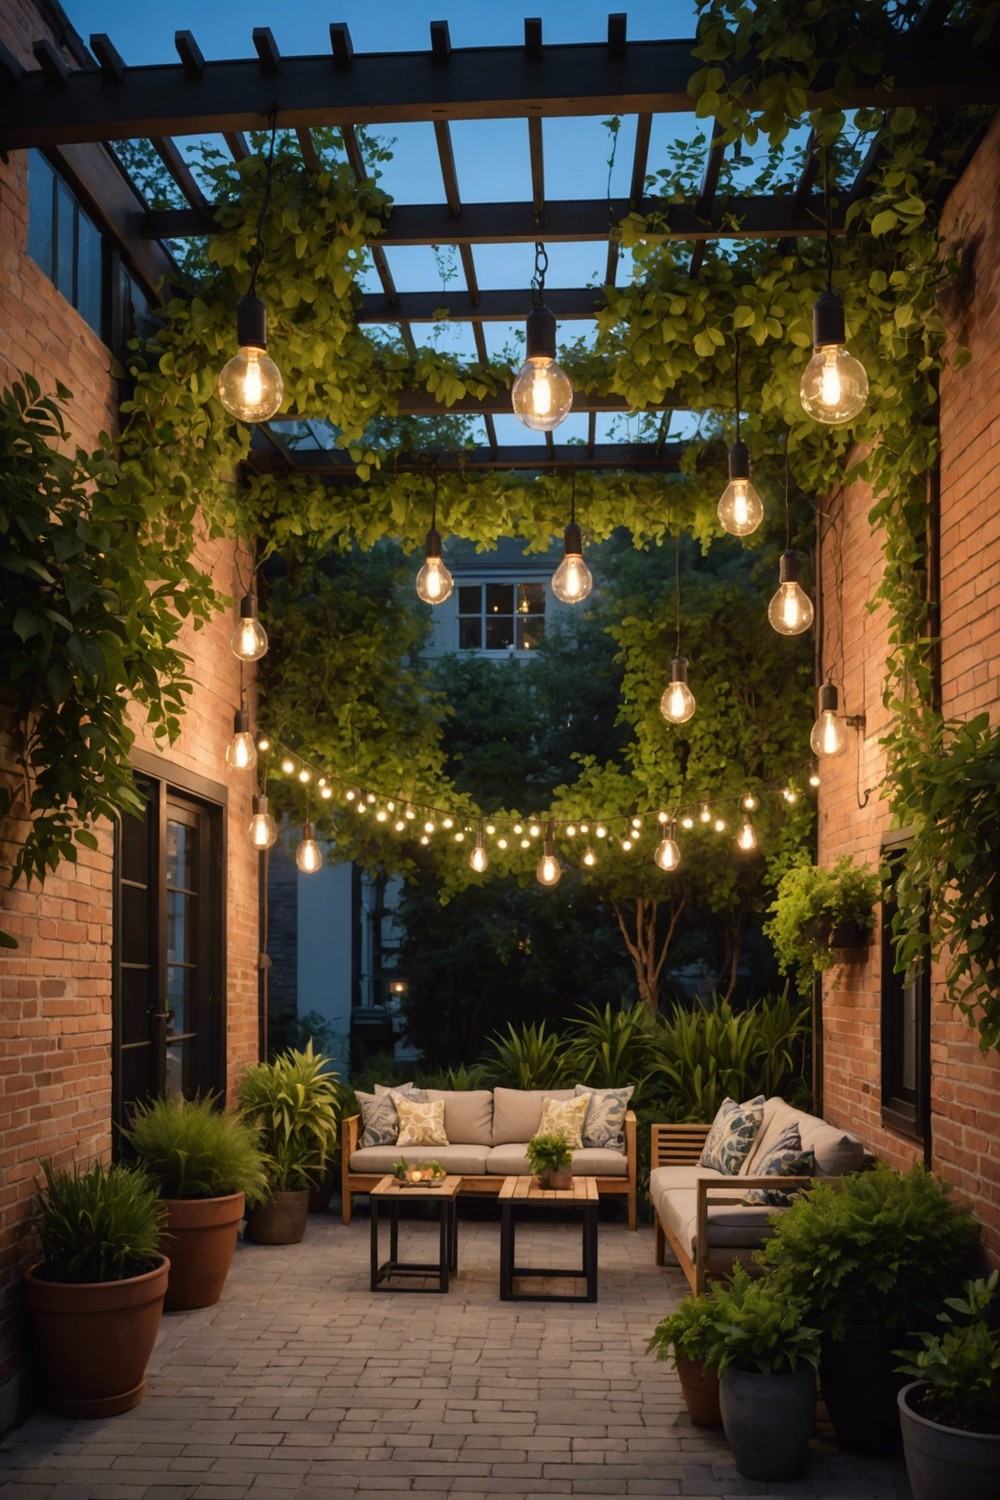 Urban Oasis with Hanging Industrial Lights